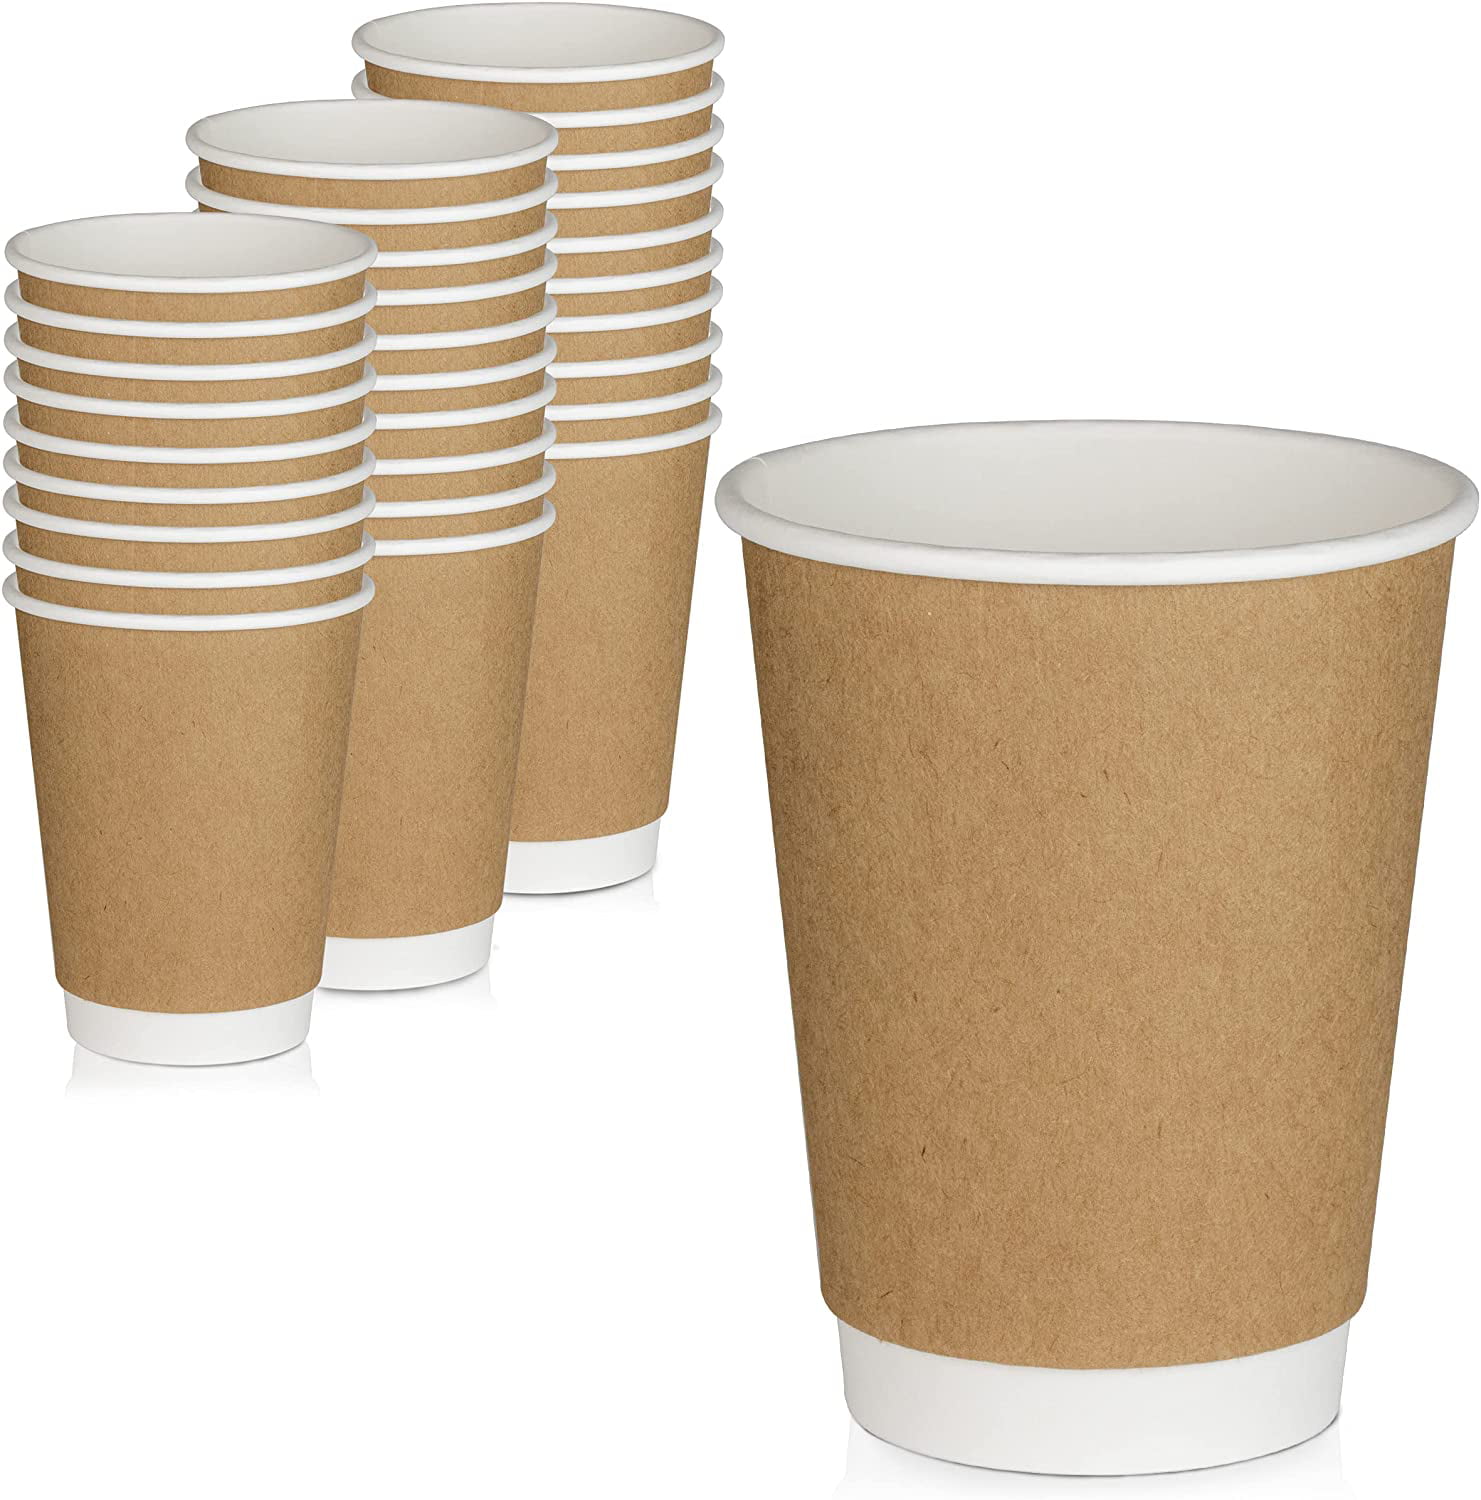 1 Strip Of 50 12oz Disposable Insulated Paper Cups For Coffee tea 